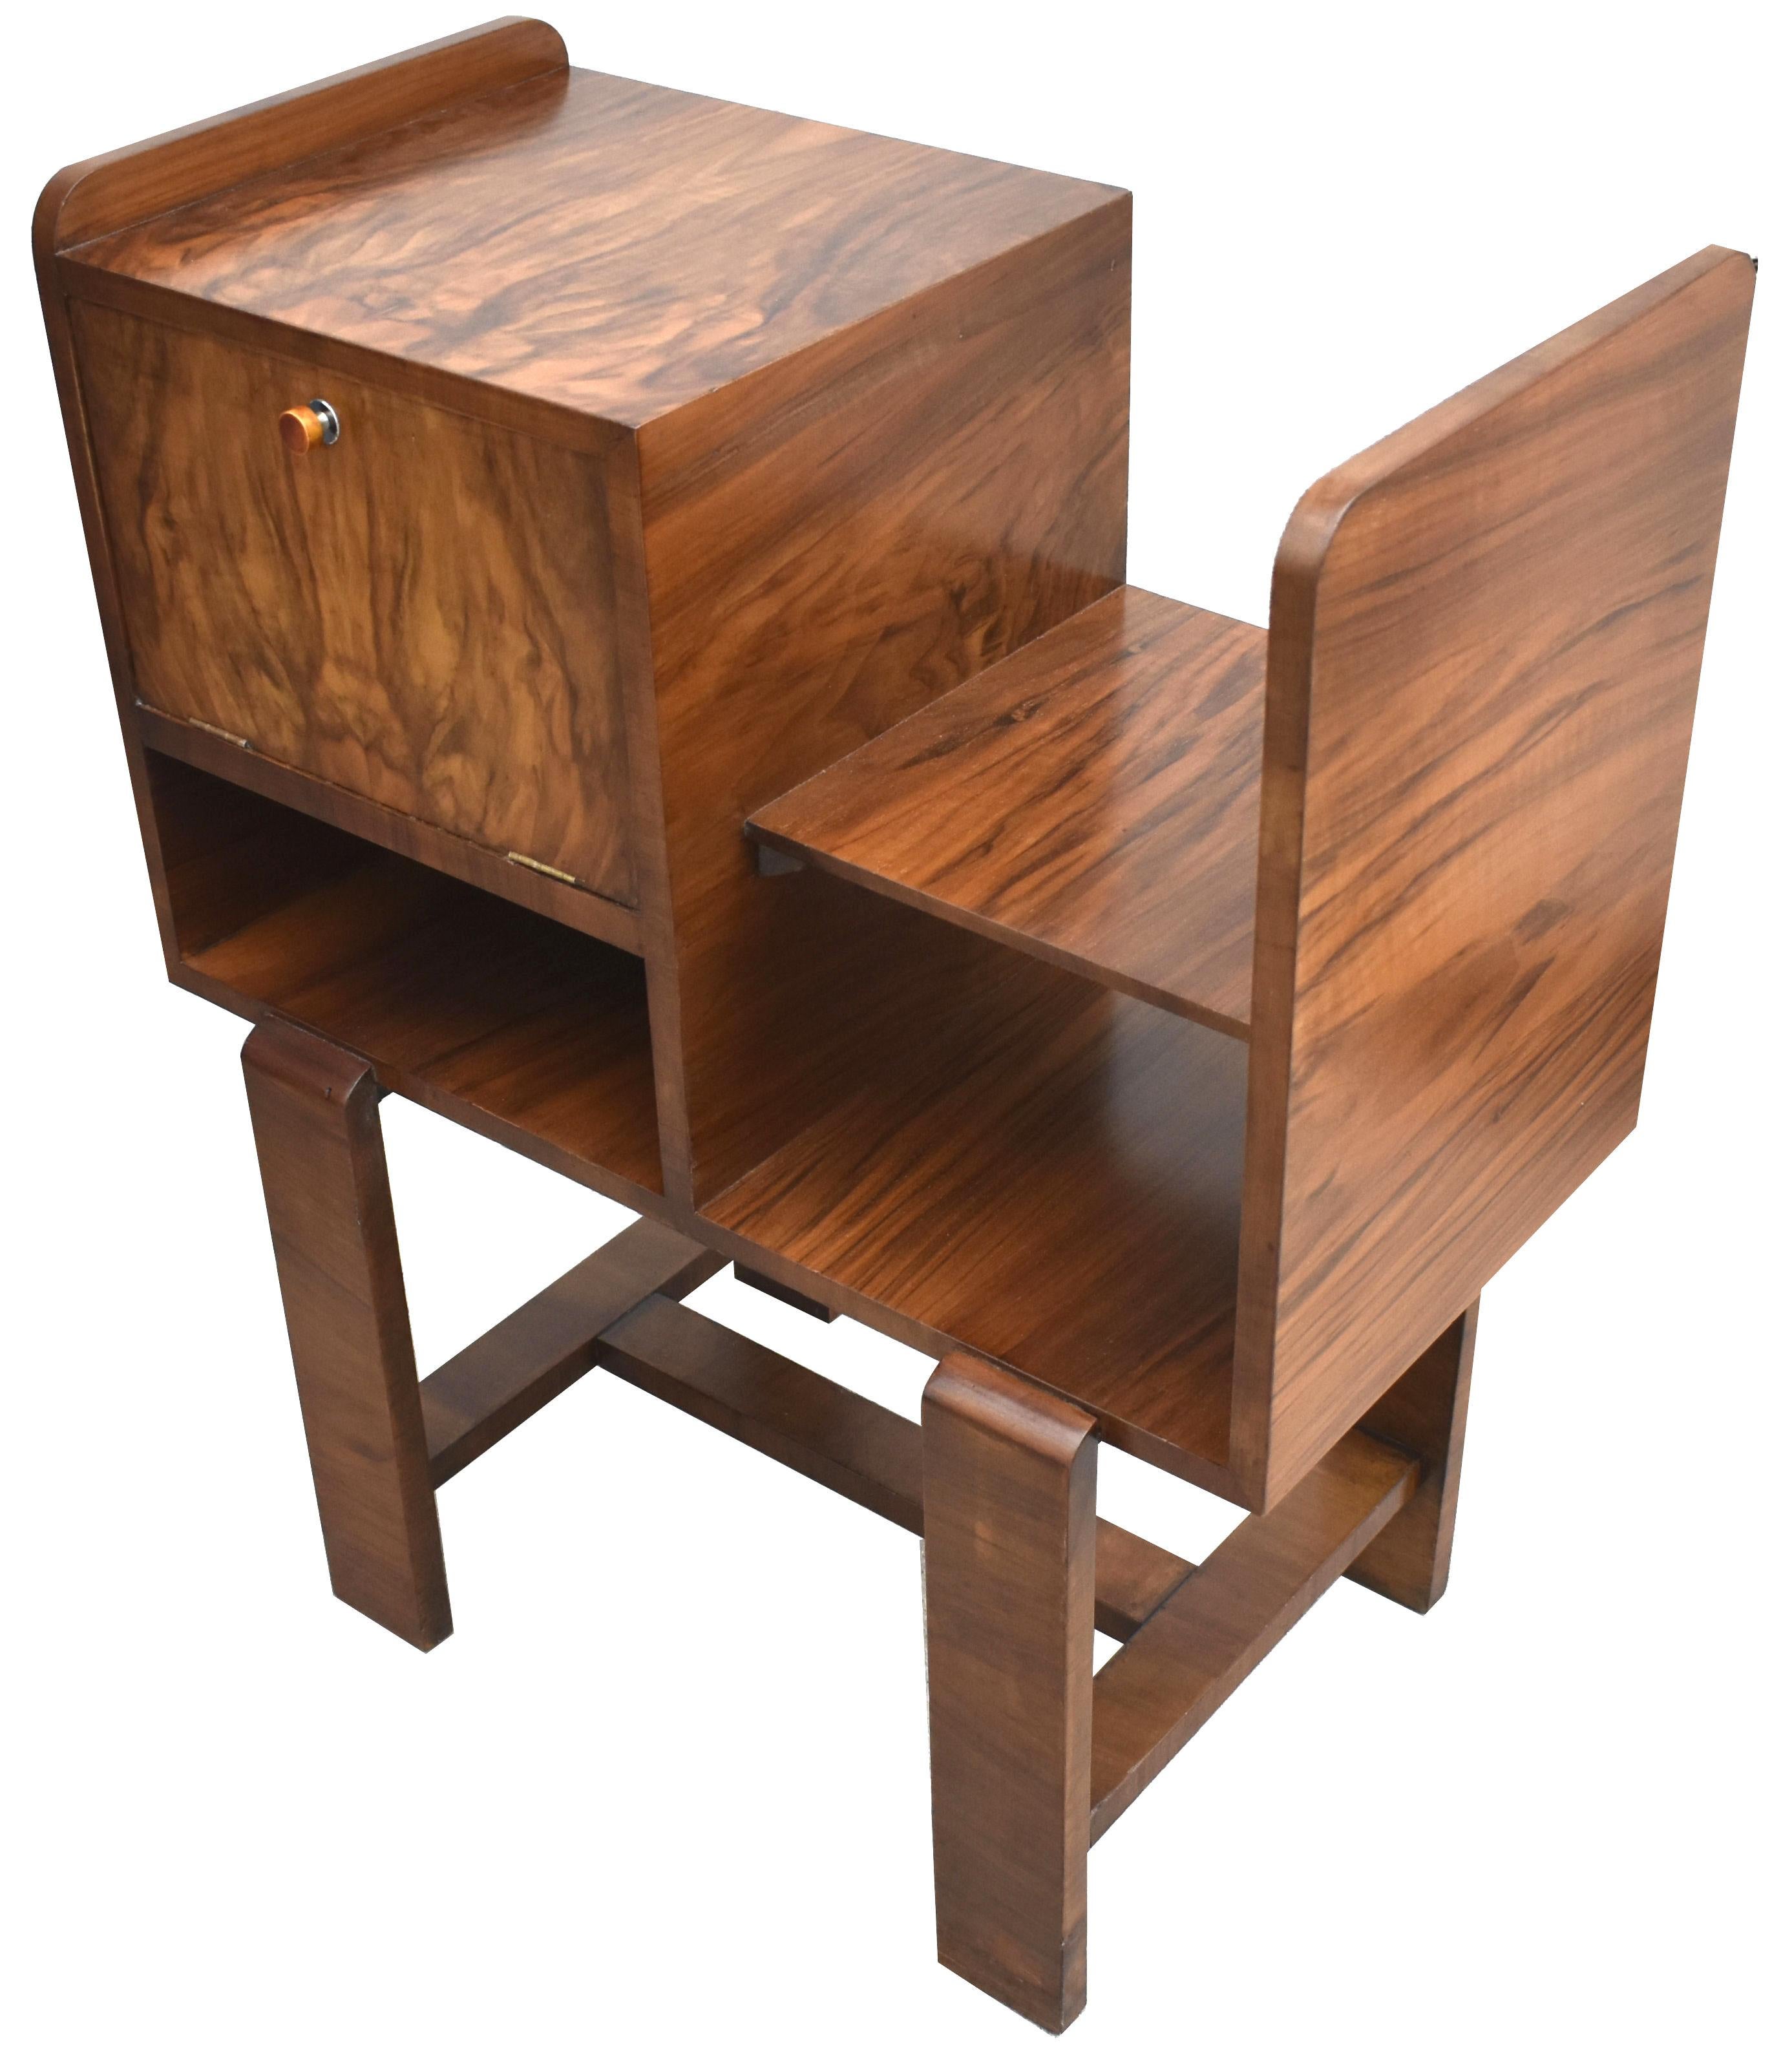 Art Deco Modernist Walnut Telephone Table, English, C1930 In Good Condition For Sale In Devon, England